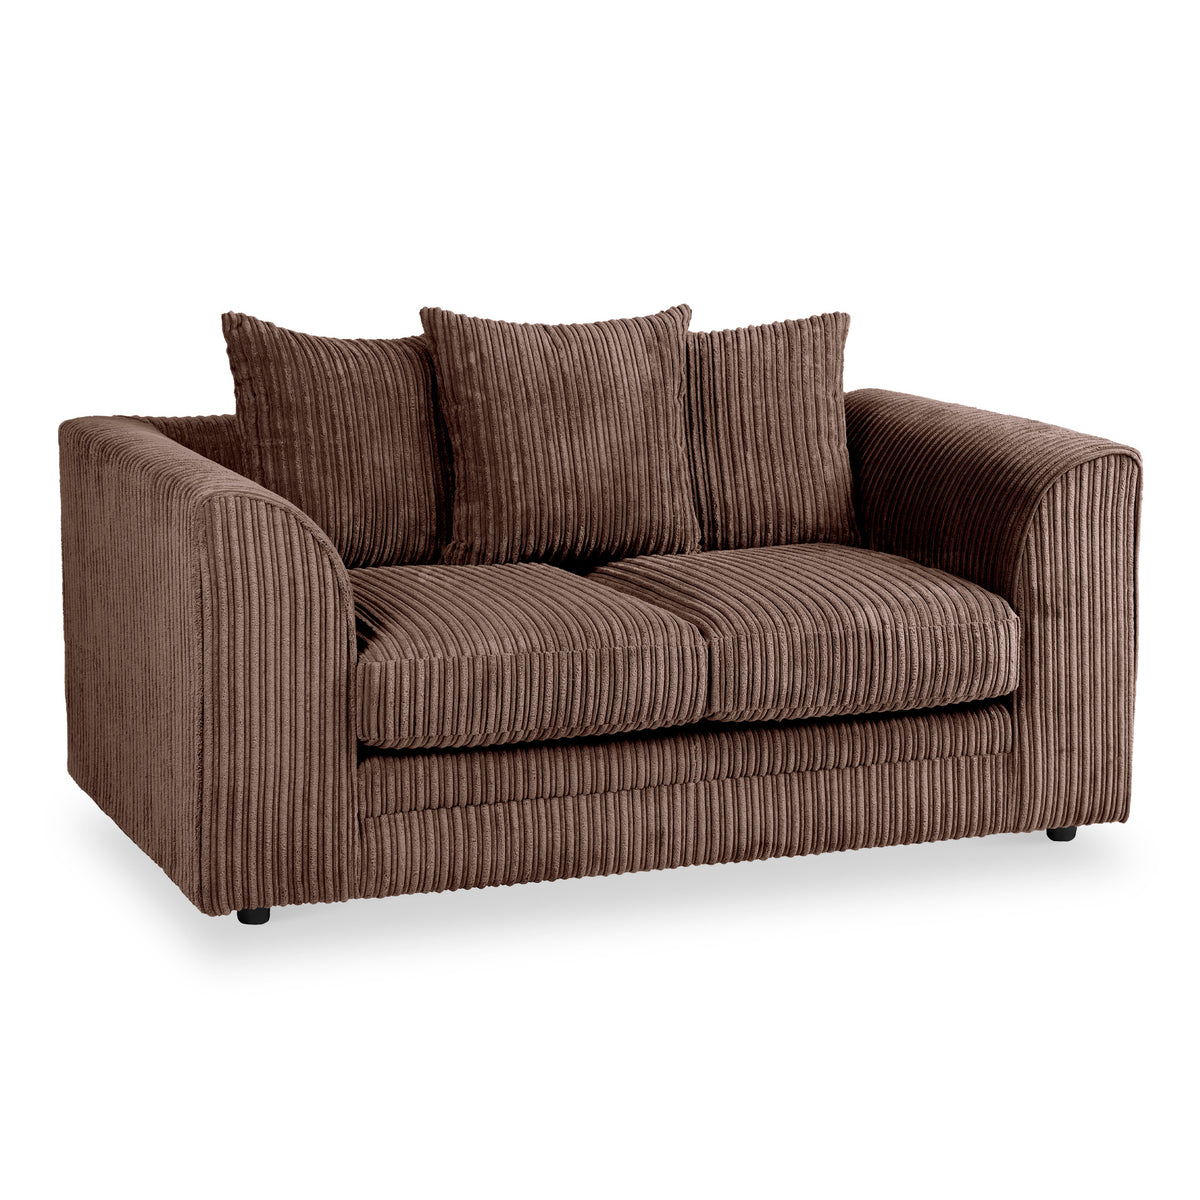 Bletchley Chocolate Jumbo Cord 2 Seater Couch from Roseland Furniture